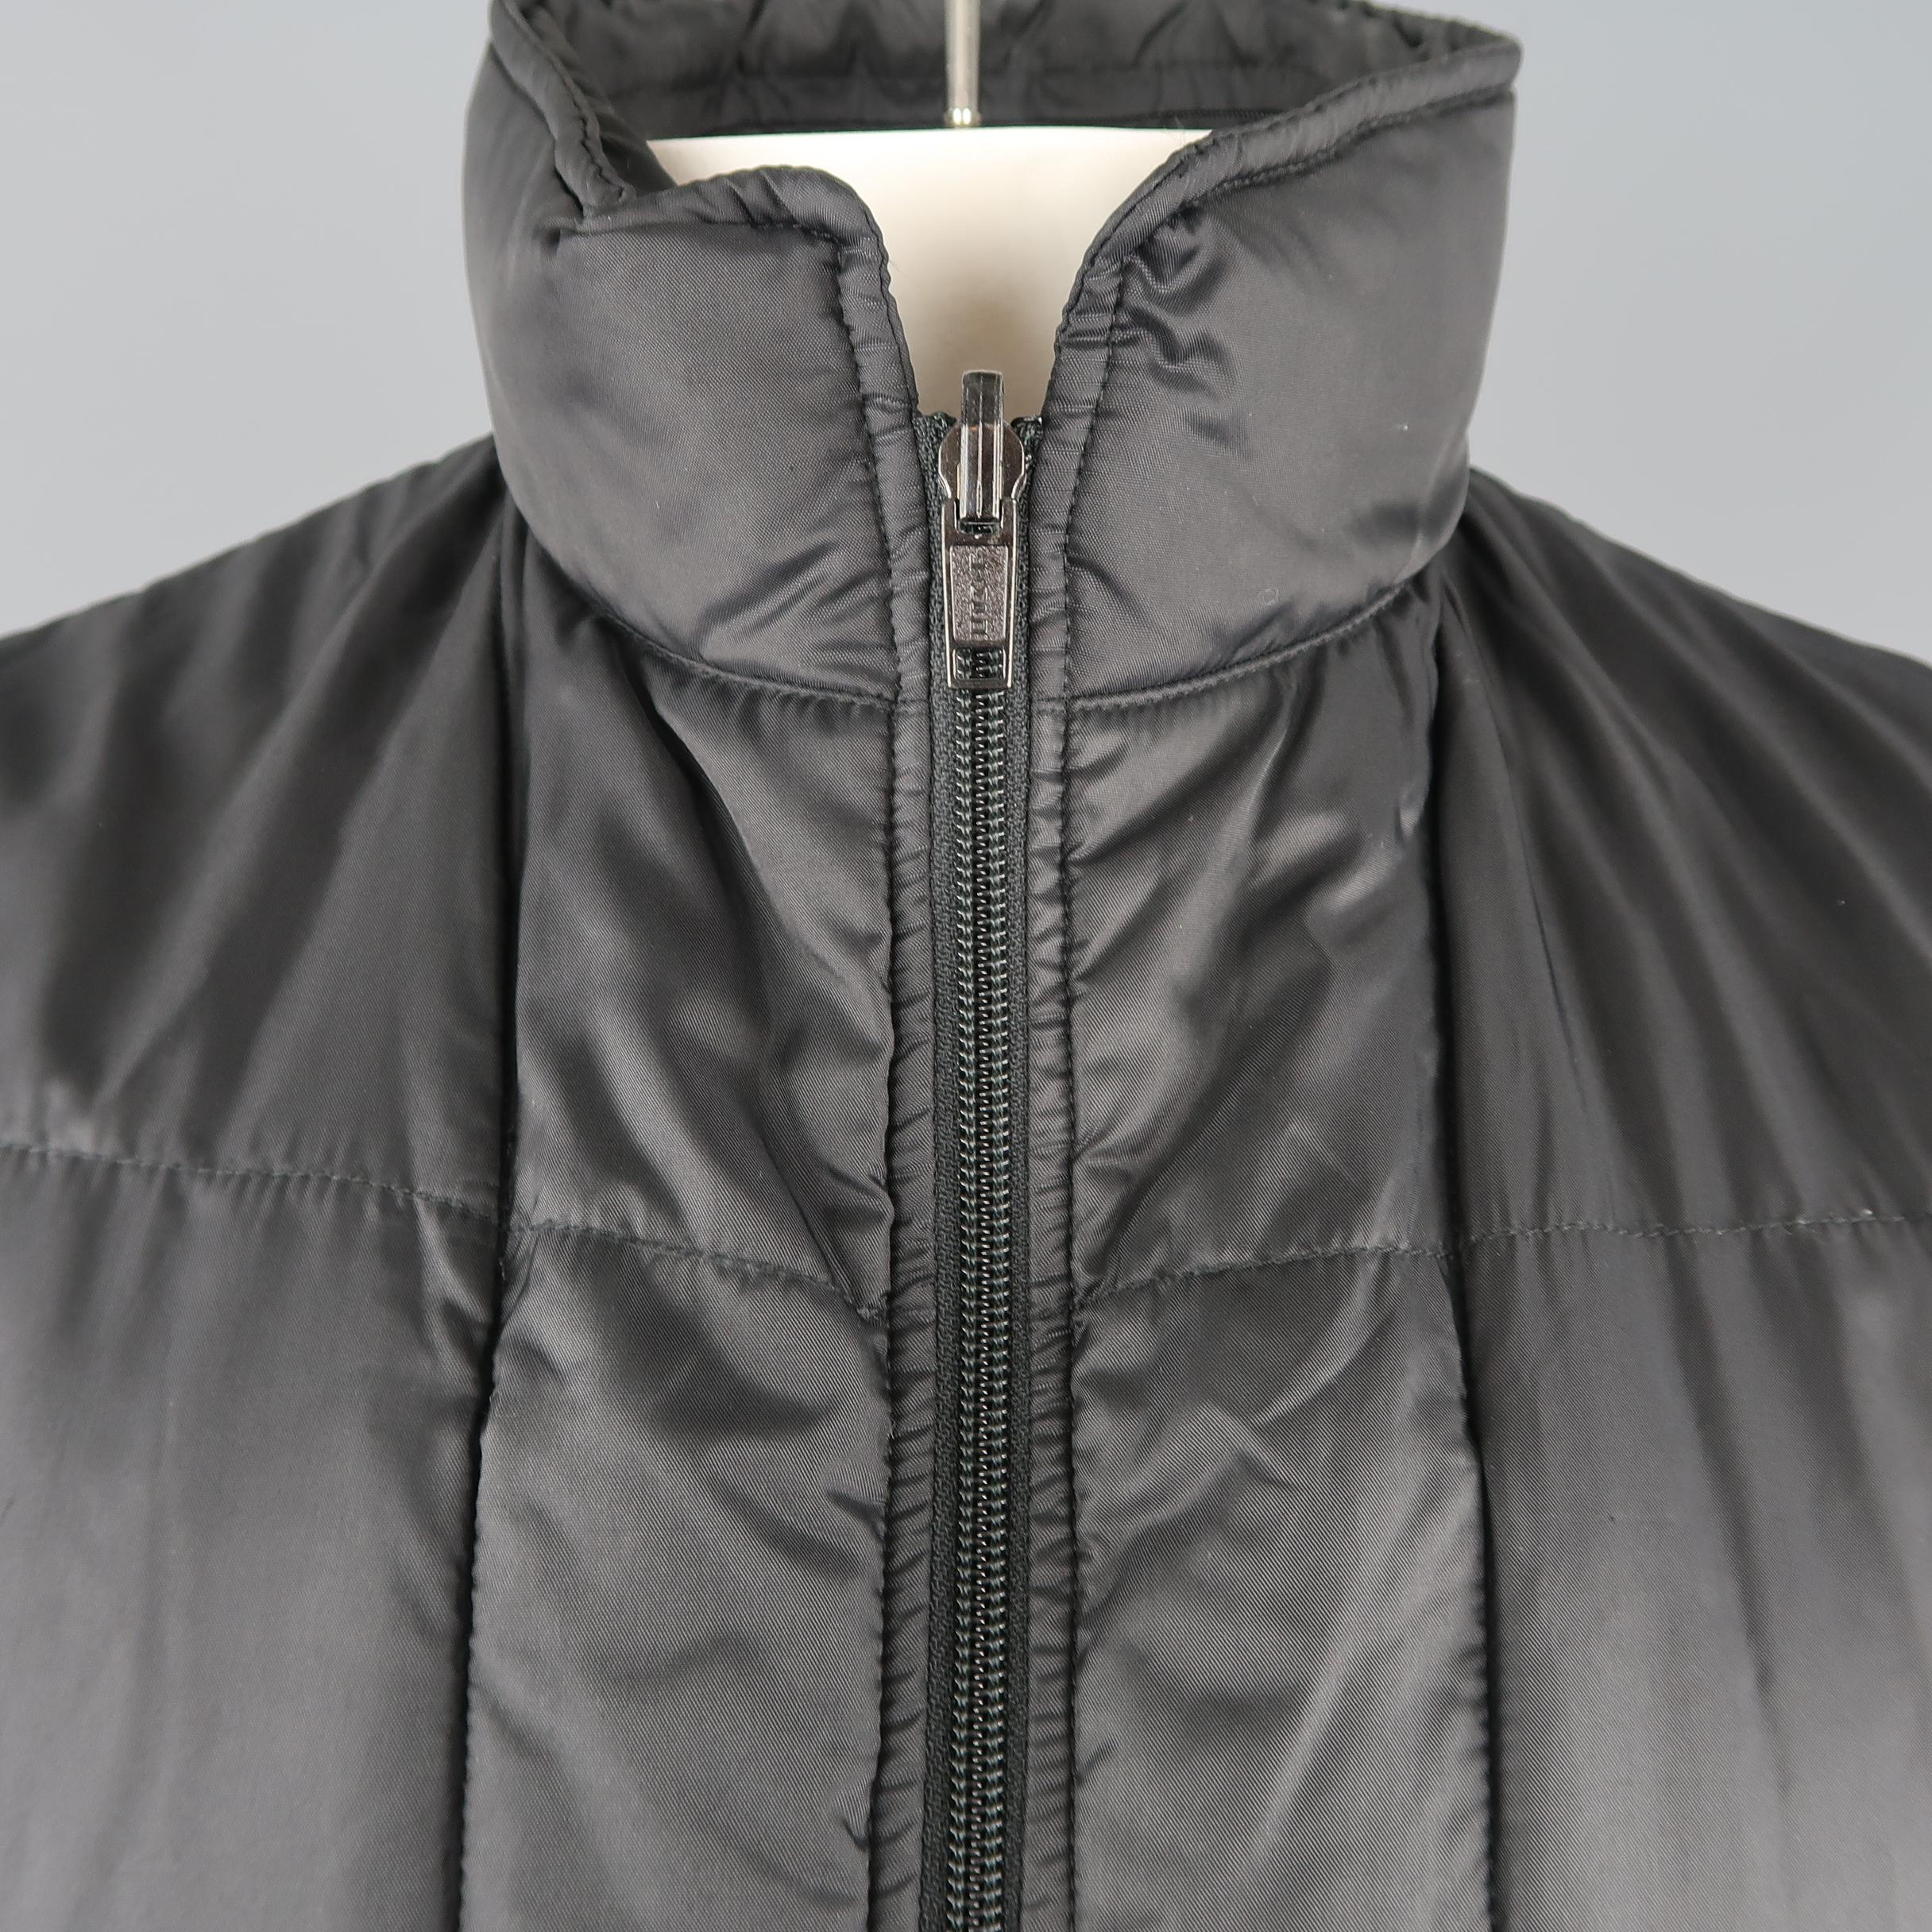 GIORGIO ARMANI vest comes in quilted nylon with zip pockets and high collar with zip out hood. Made in Italy.
 
Very Good Pre-Owned Condition.
Marked: 42
 
Measurements:
 
Shoulder: 18 in.
Chest: 48 in.
Length: 28 in.